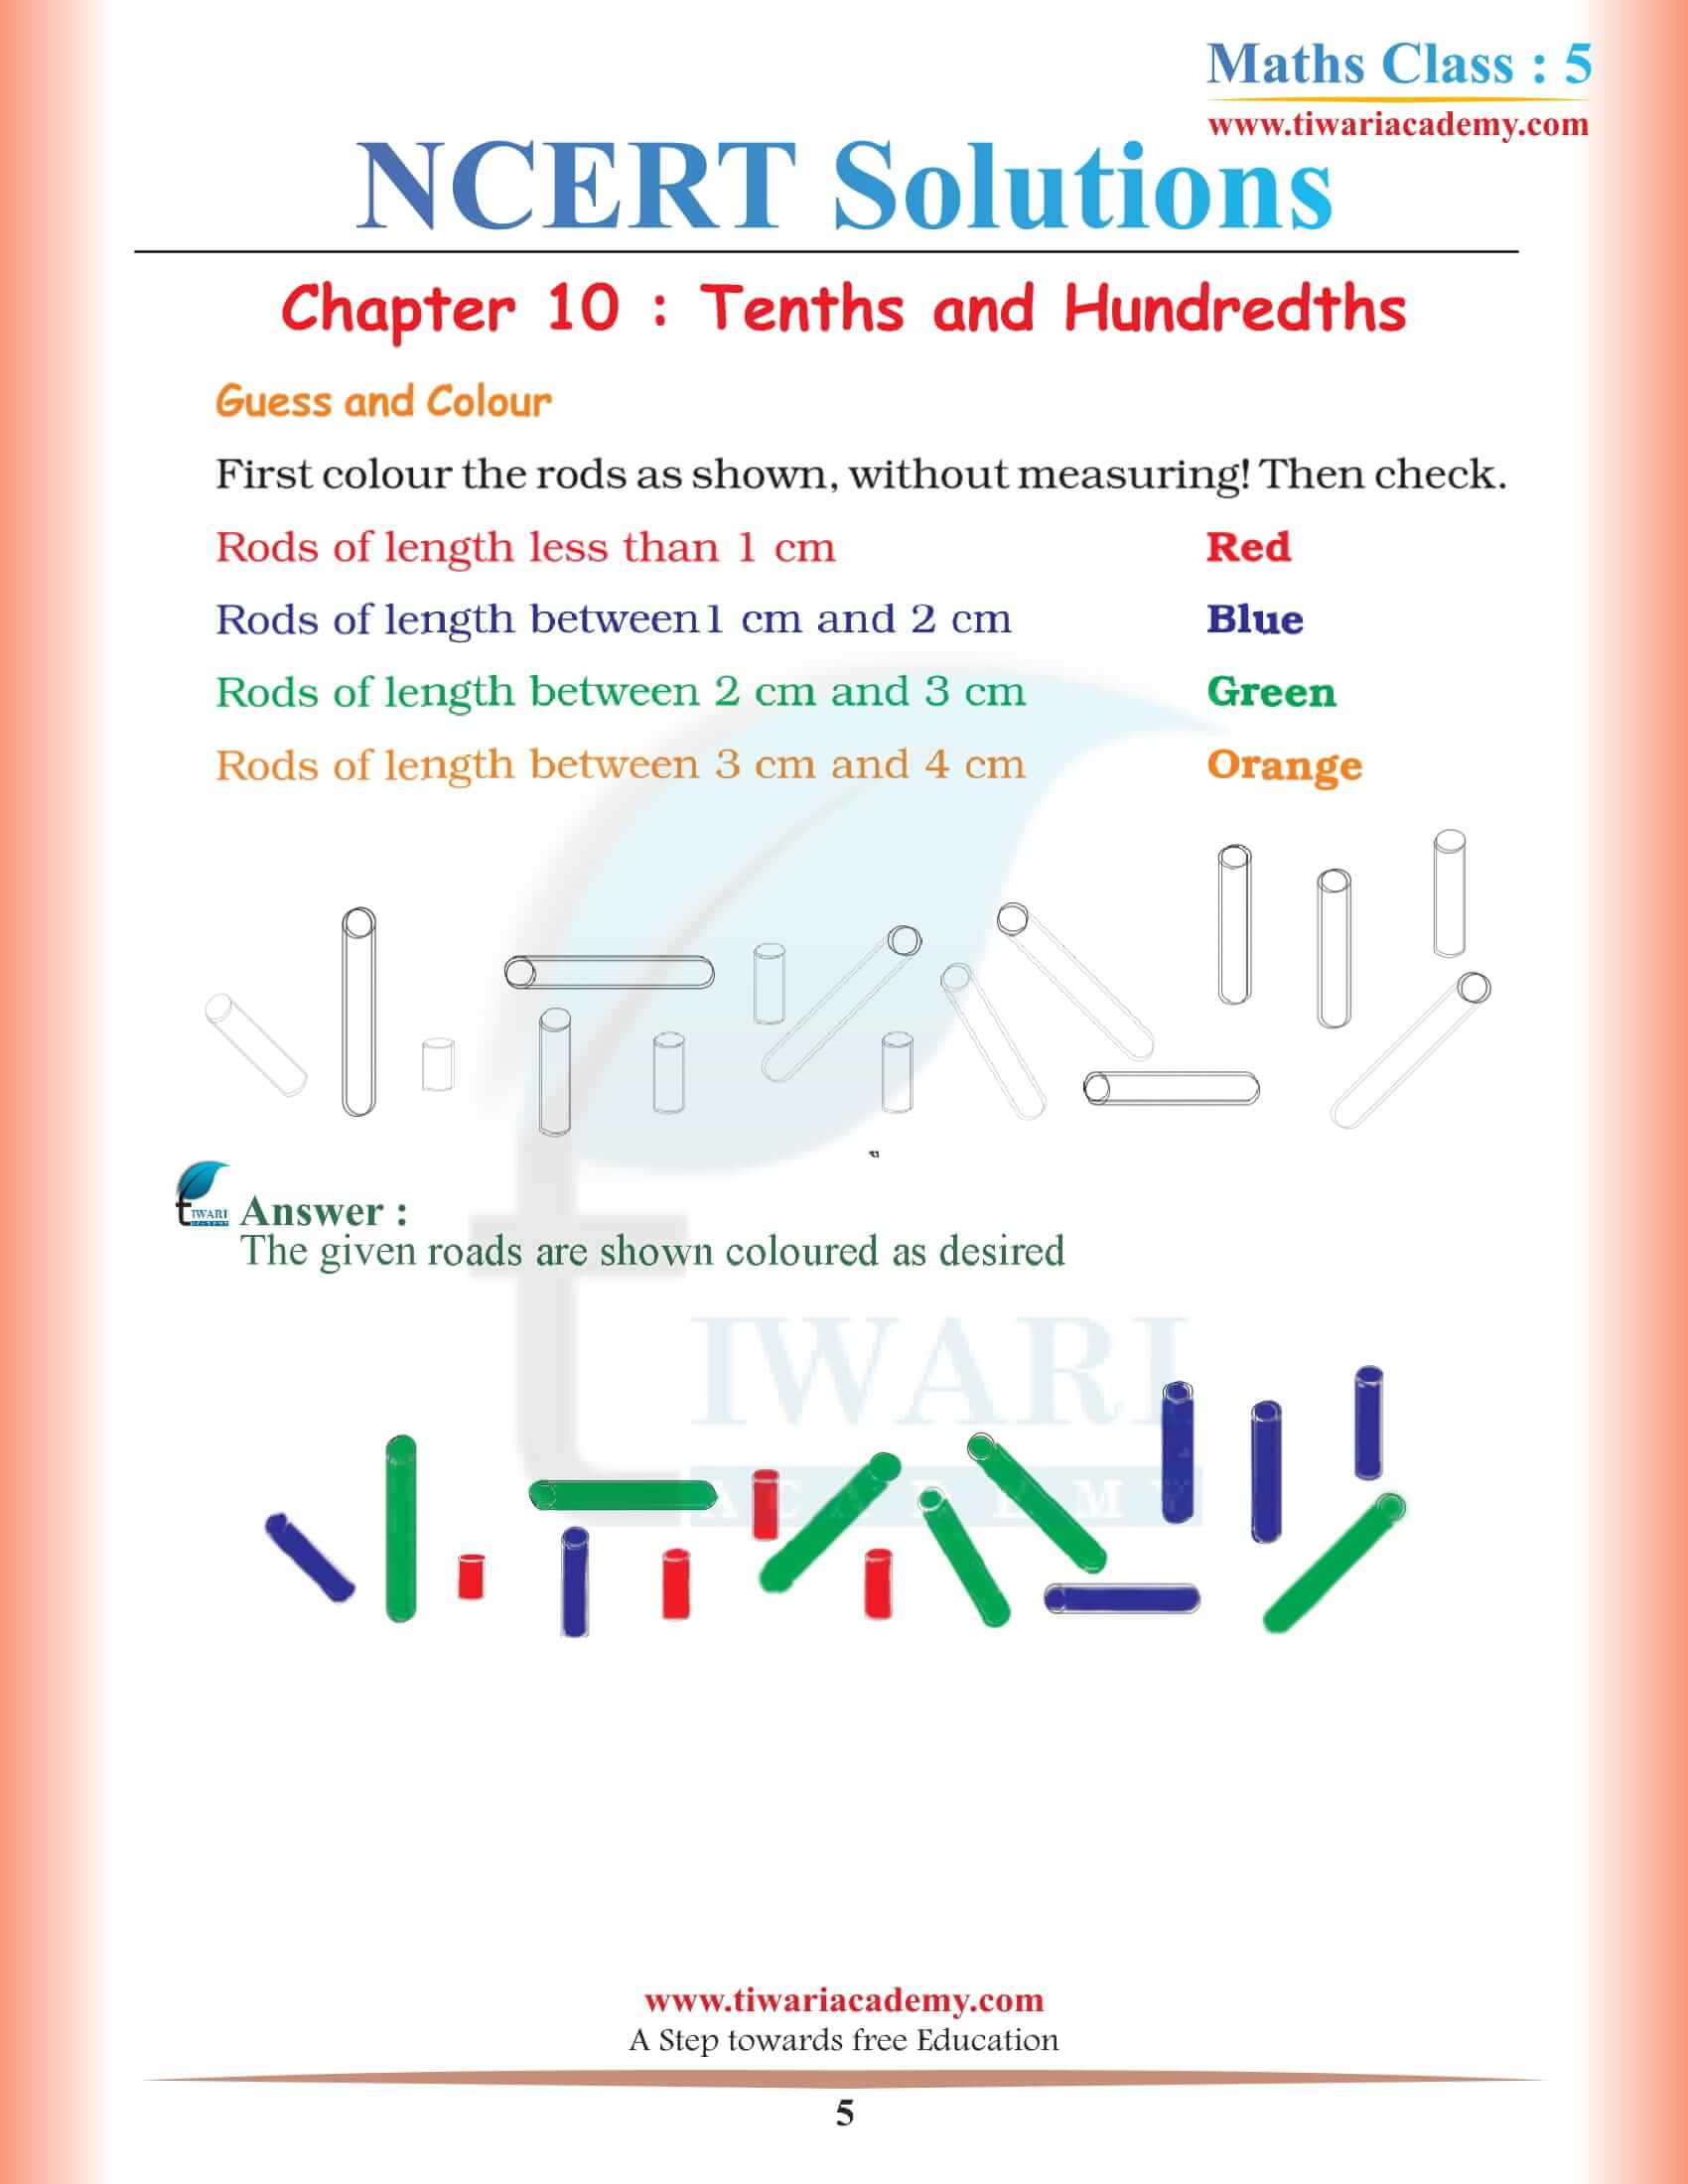 NCERT Solutions for Class 5 Maths Chapter 10 Free Download